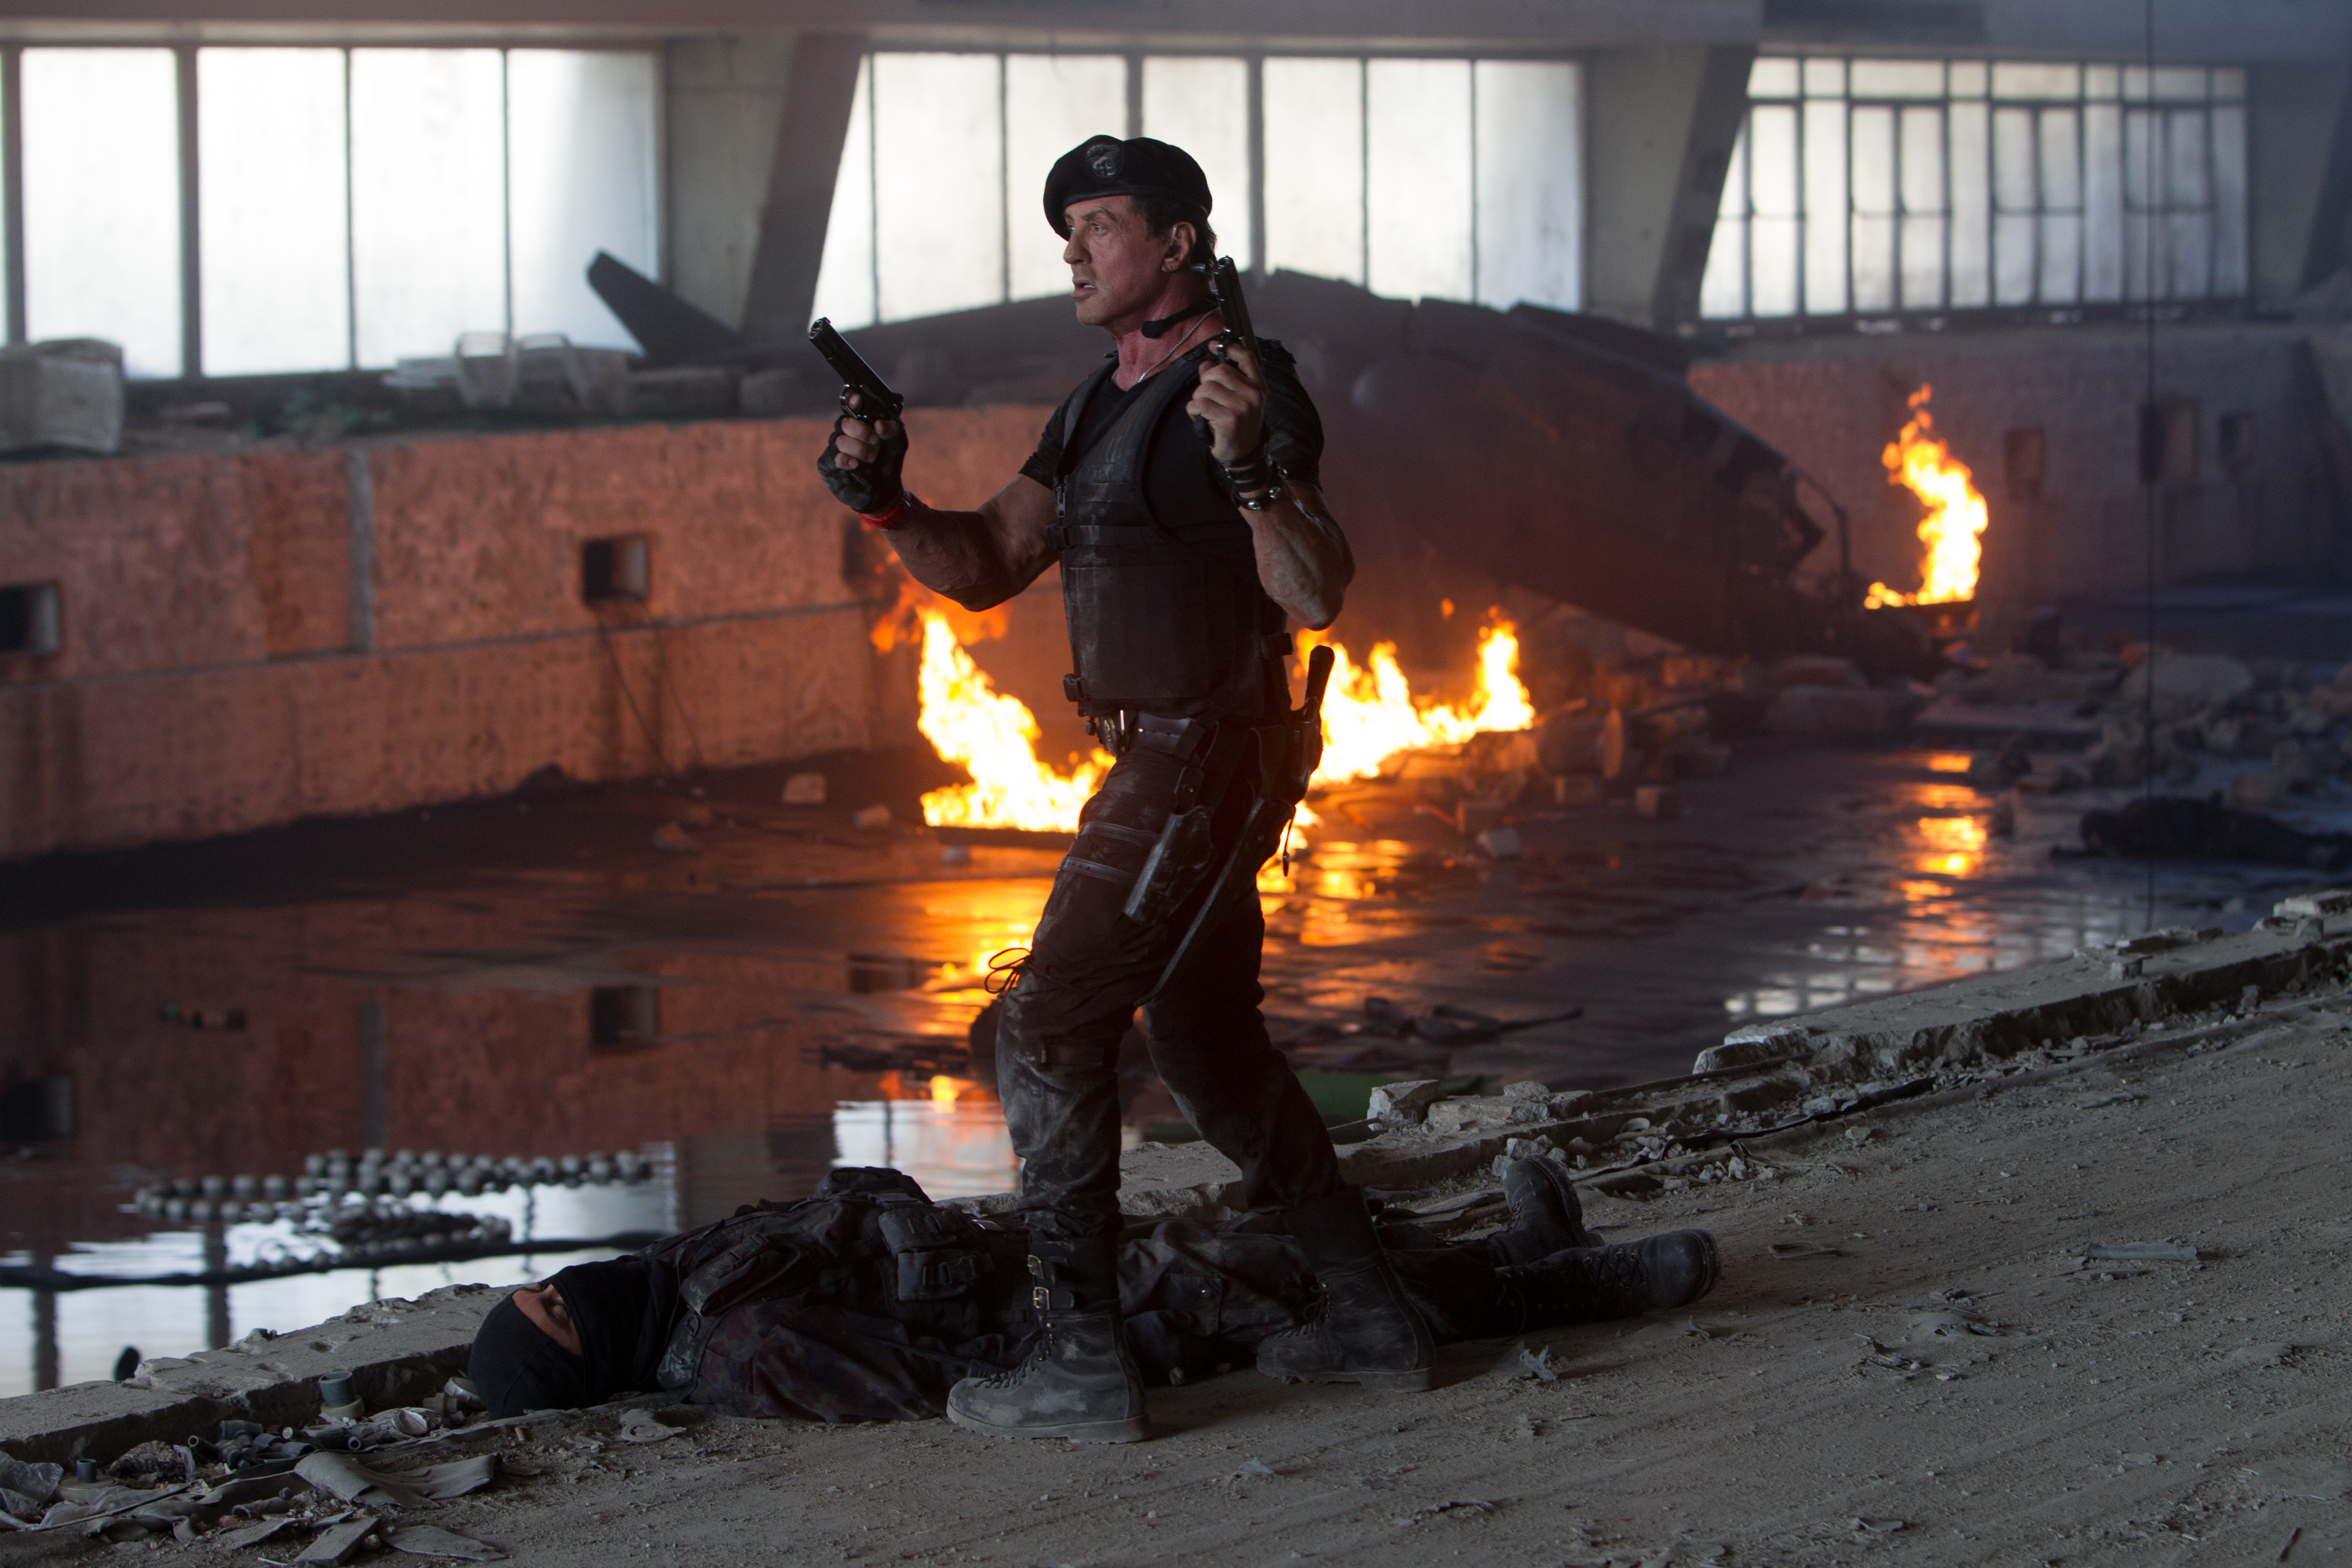 Movie The Expendables 3 4k Ultra HD Wallpaper